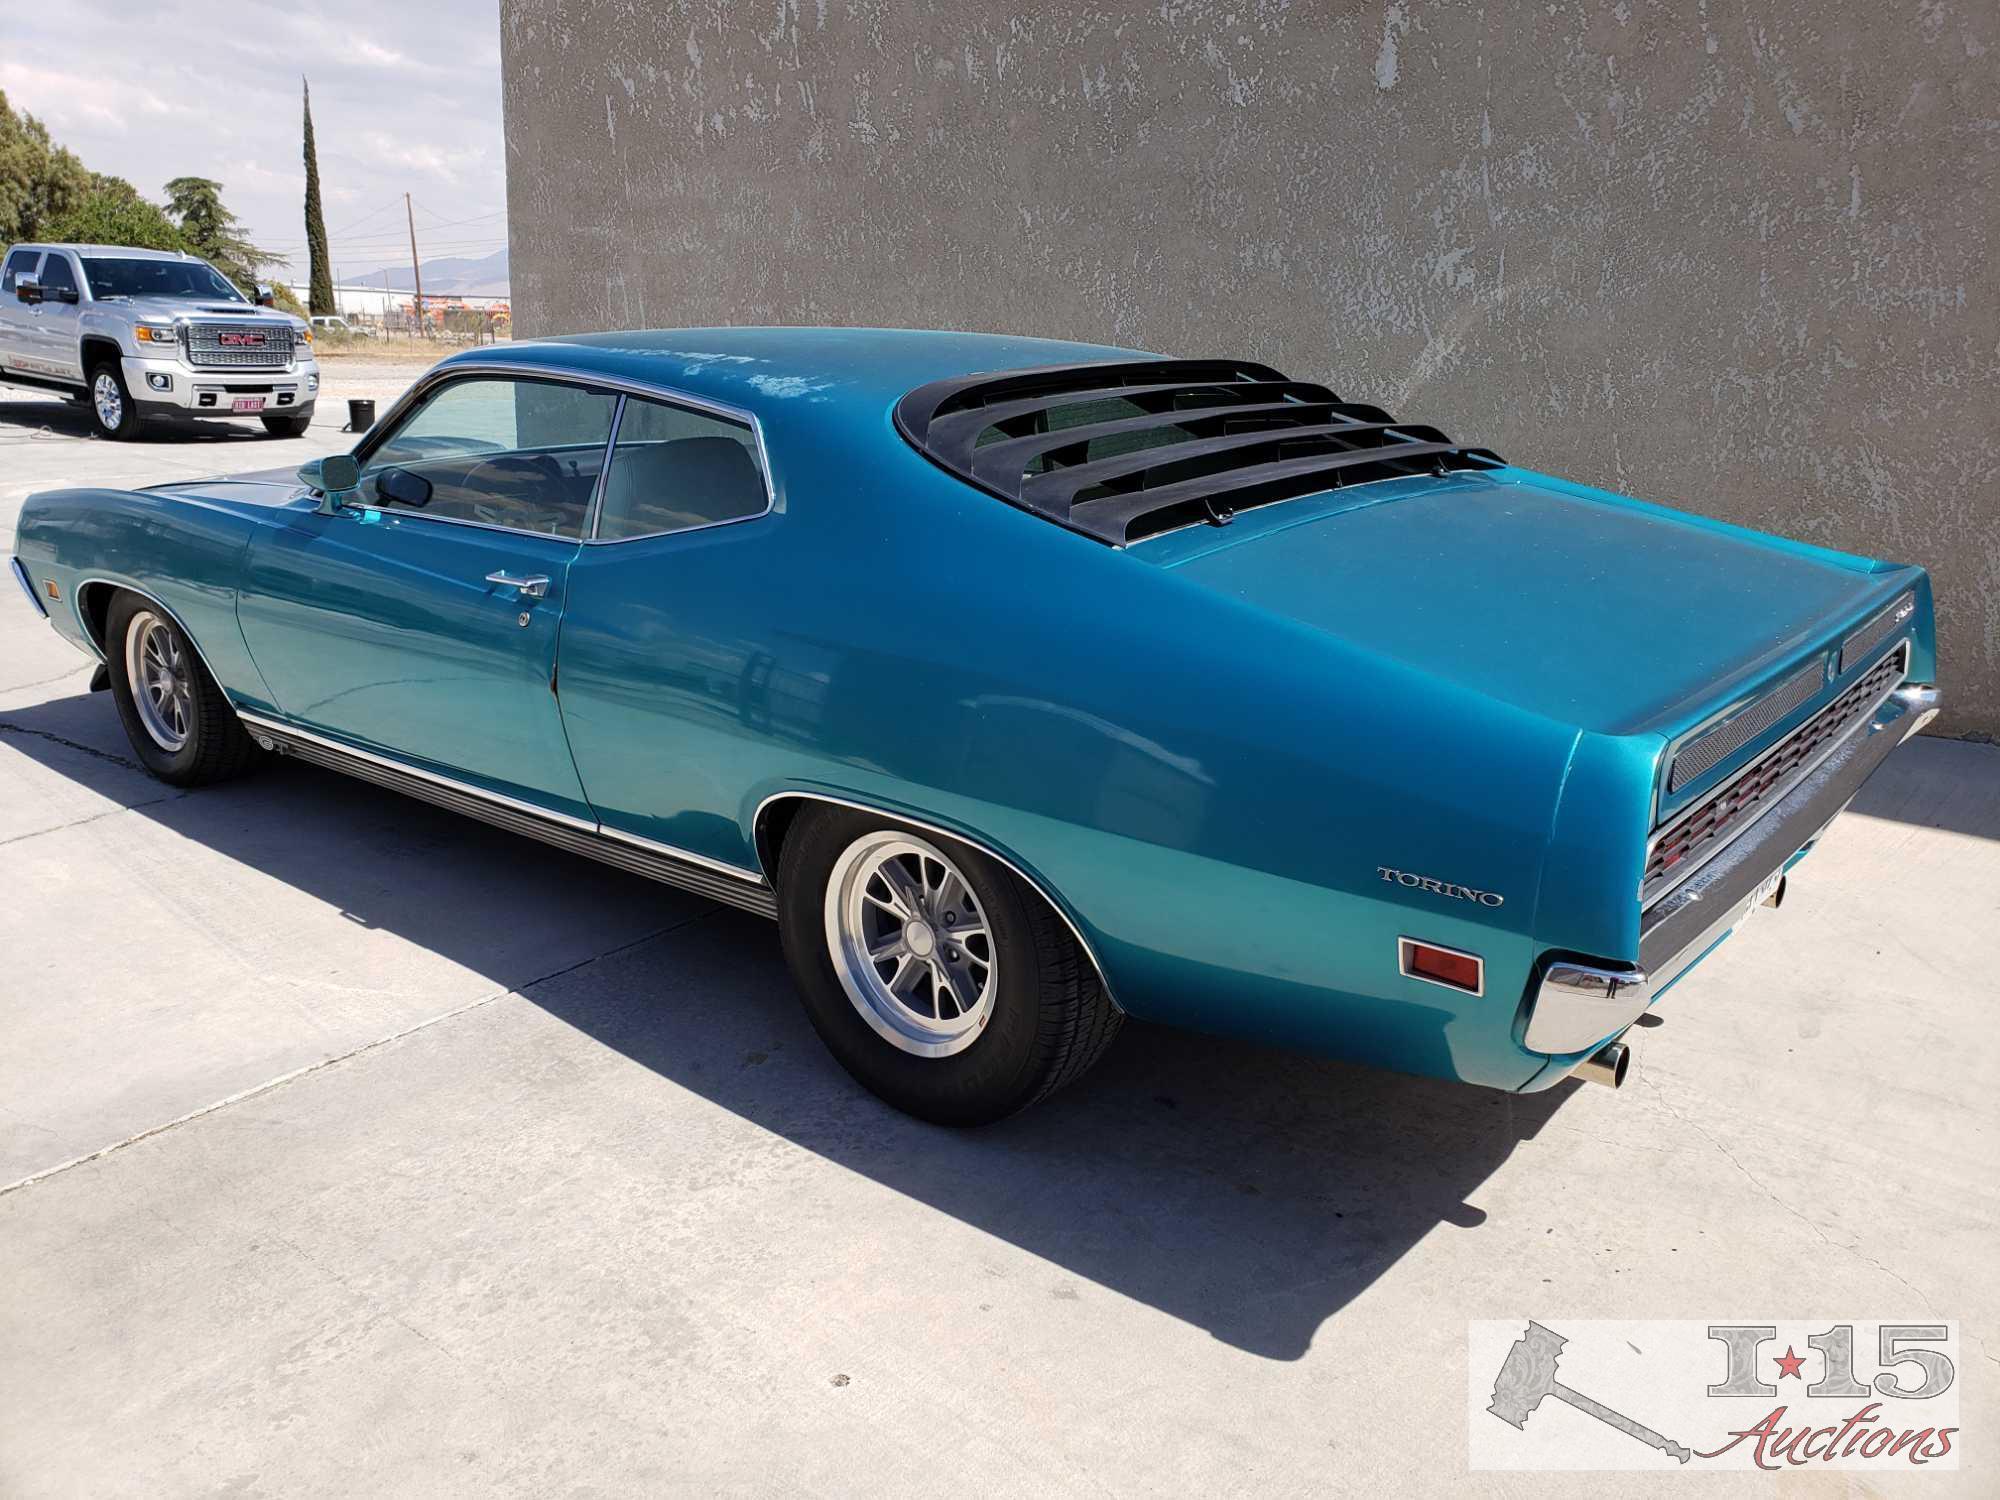 1971 Ford Torino GT, 429 Cobra Jet Running Driving Car!! With Elite Marti Report! See Video!